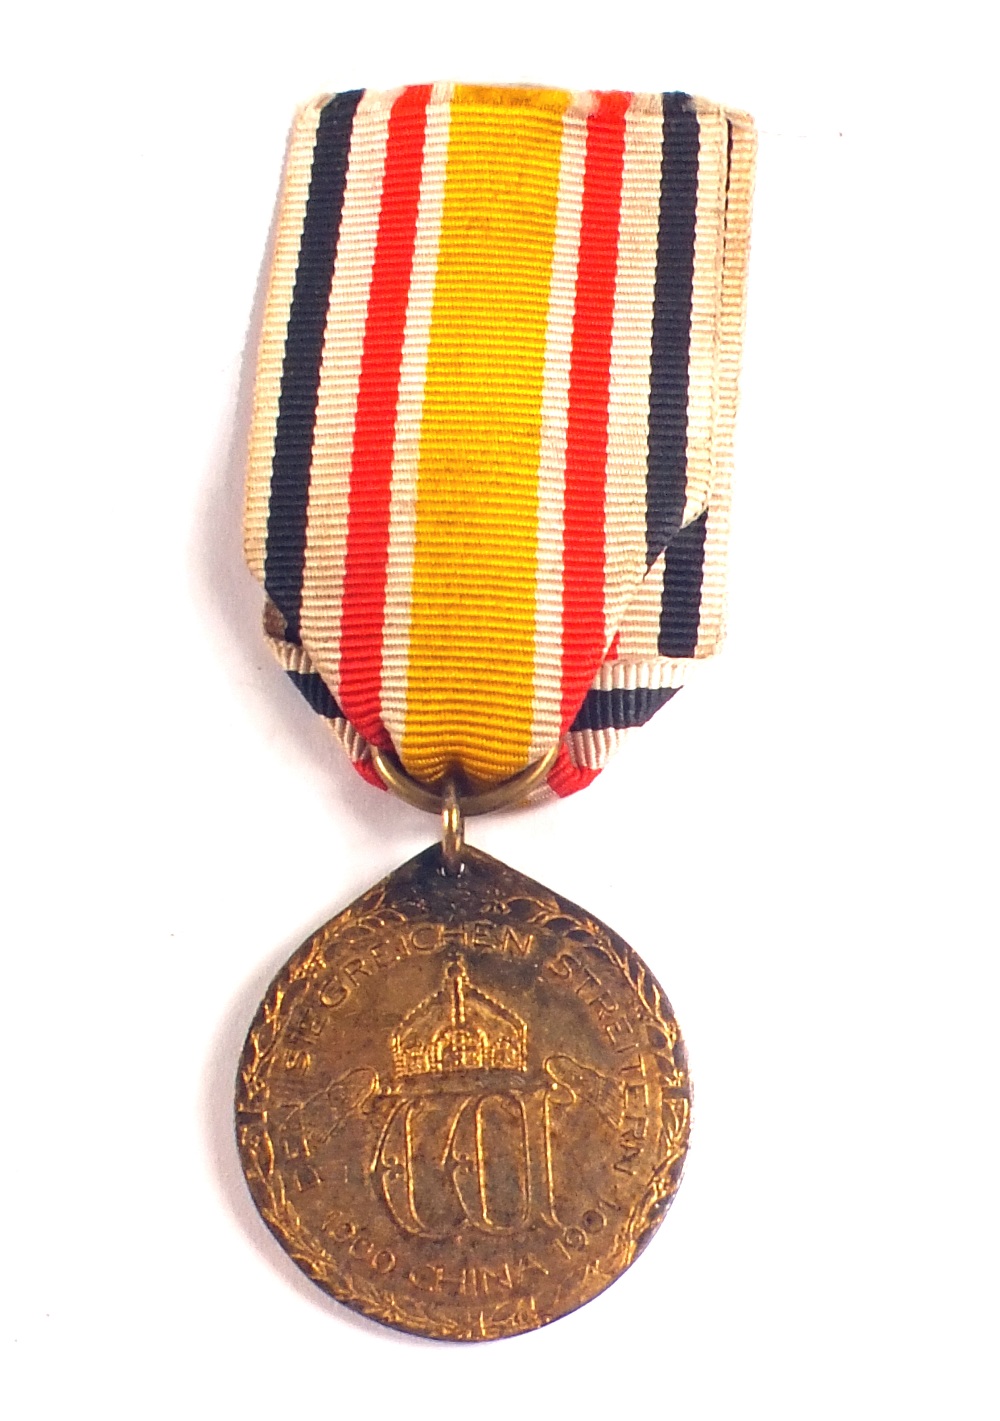 An Imperial German (PATTERN) China Campaign medal